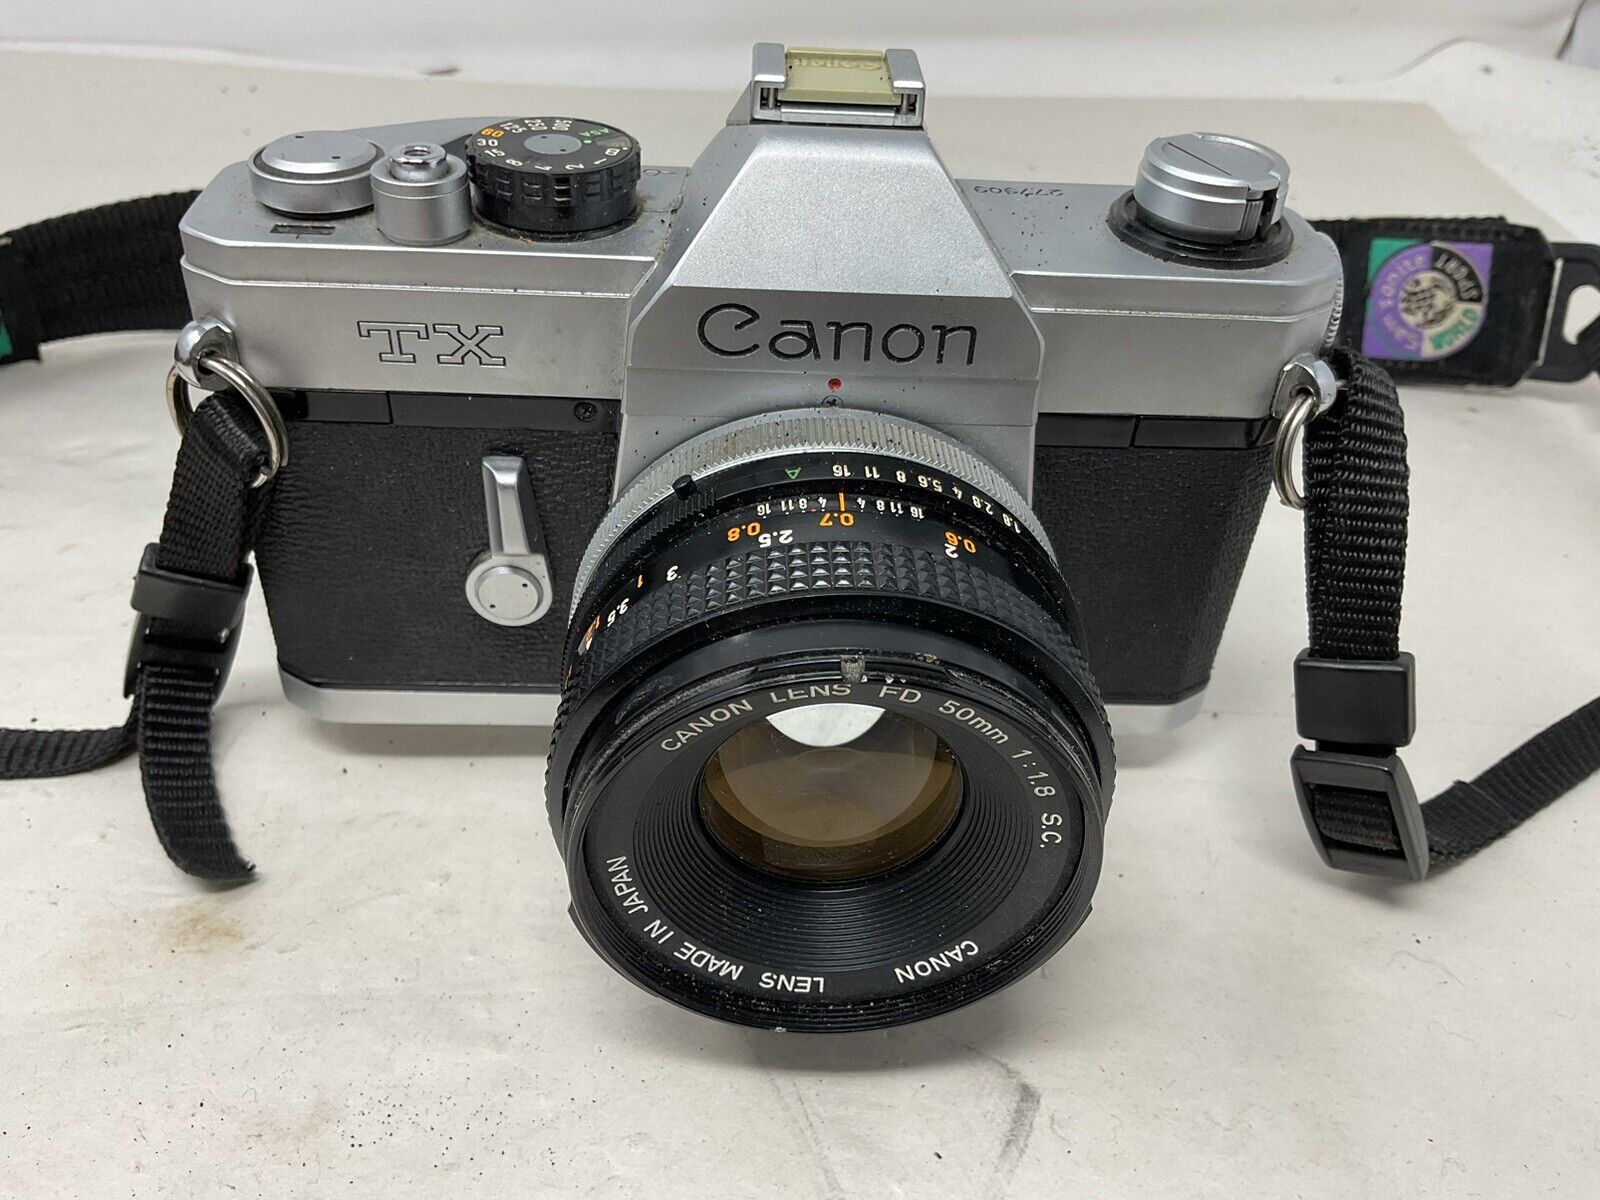 Canon TX 35mm Film Camera with 50mm f/1.8 Canon FD Lens